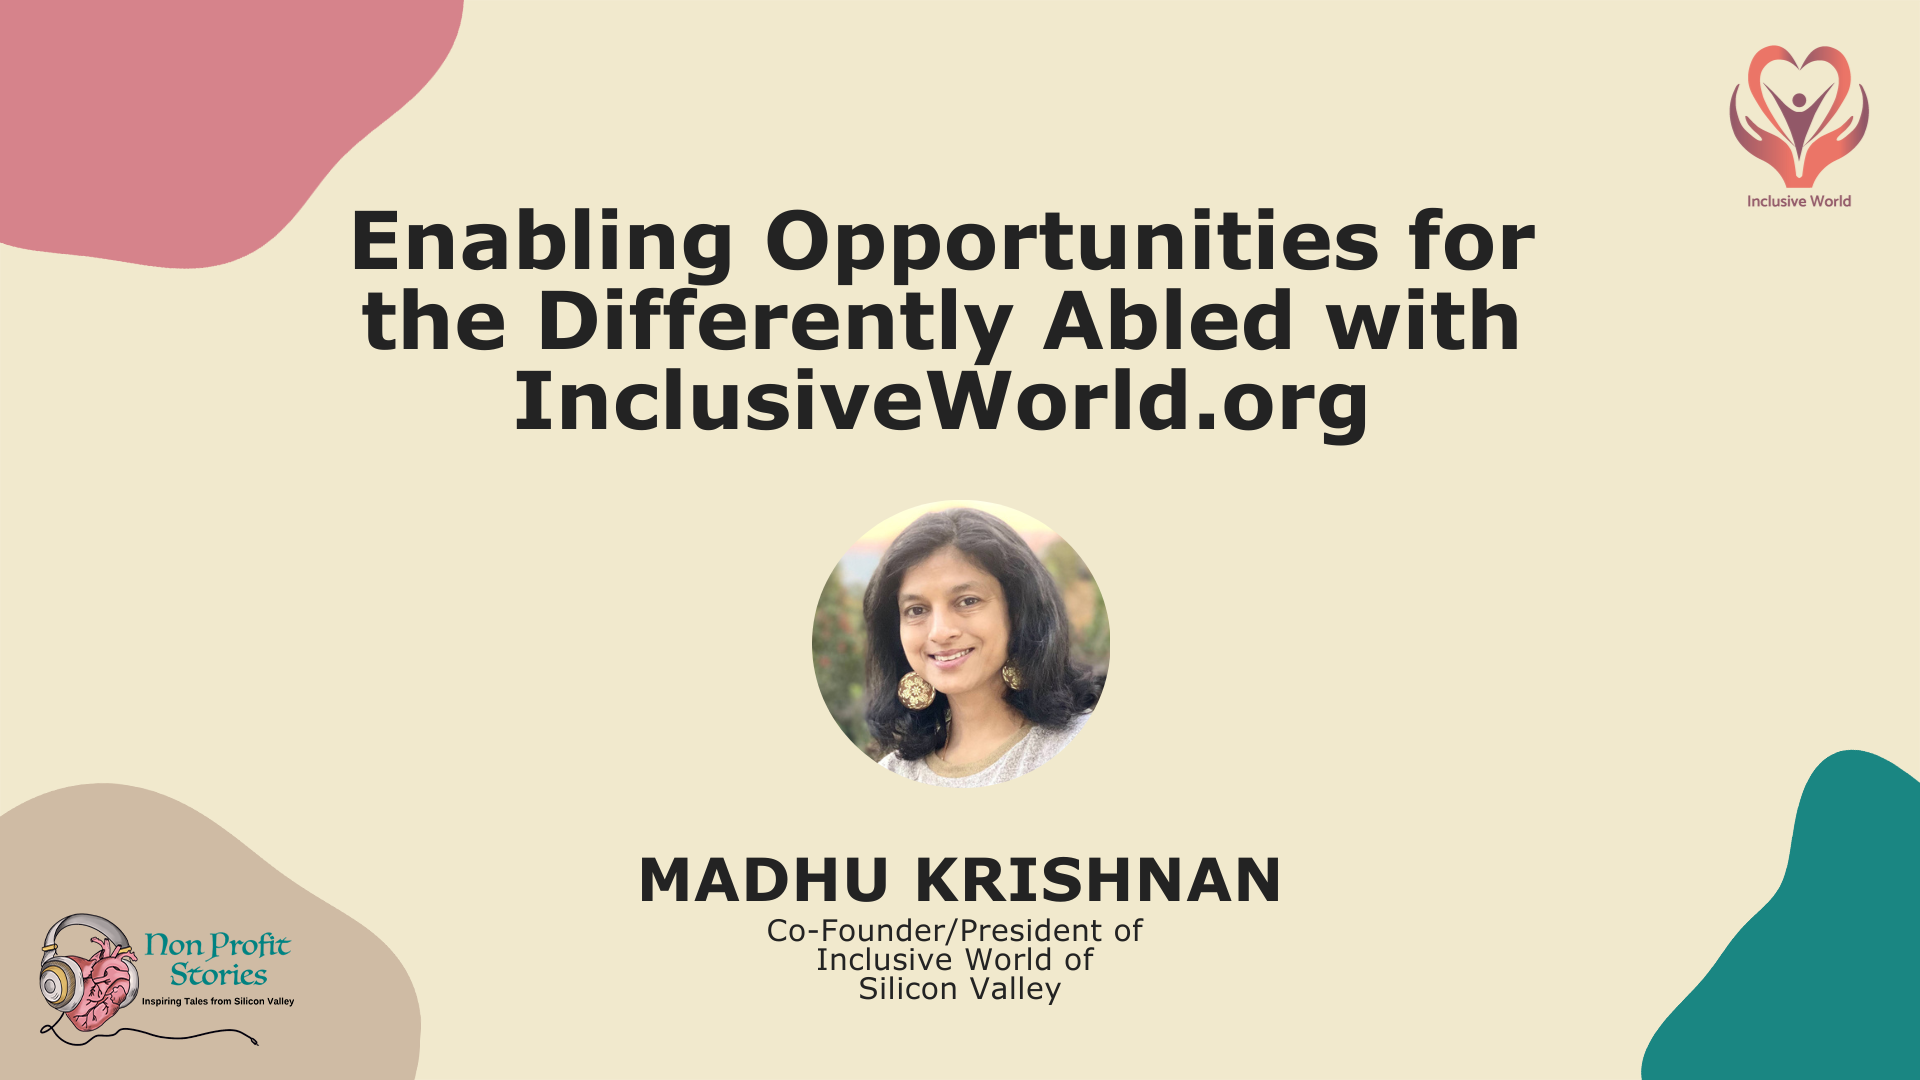 Enabling Opportunities for the Differently Abled with Inclusive World